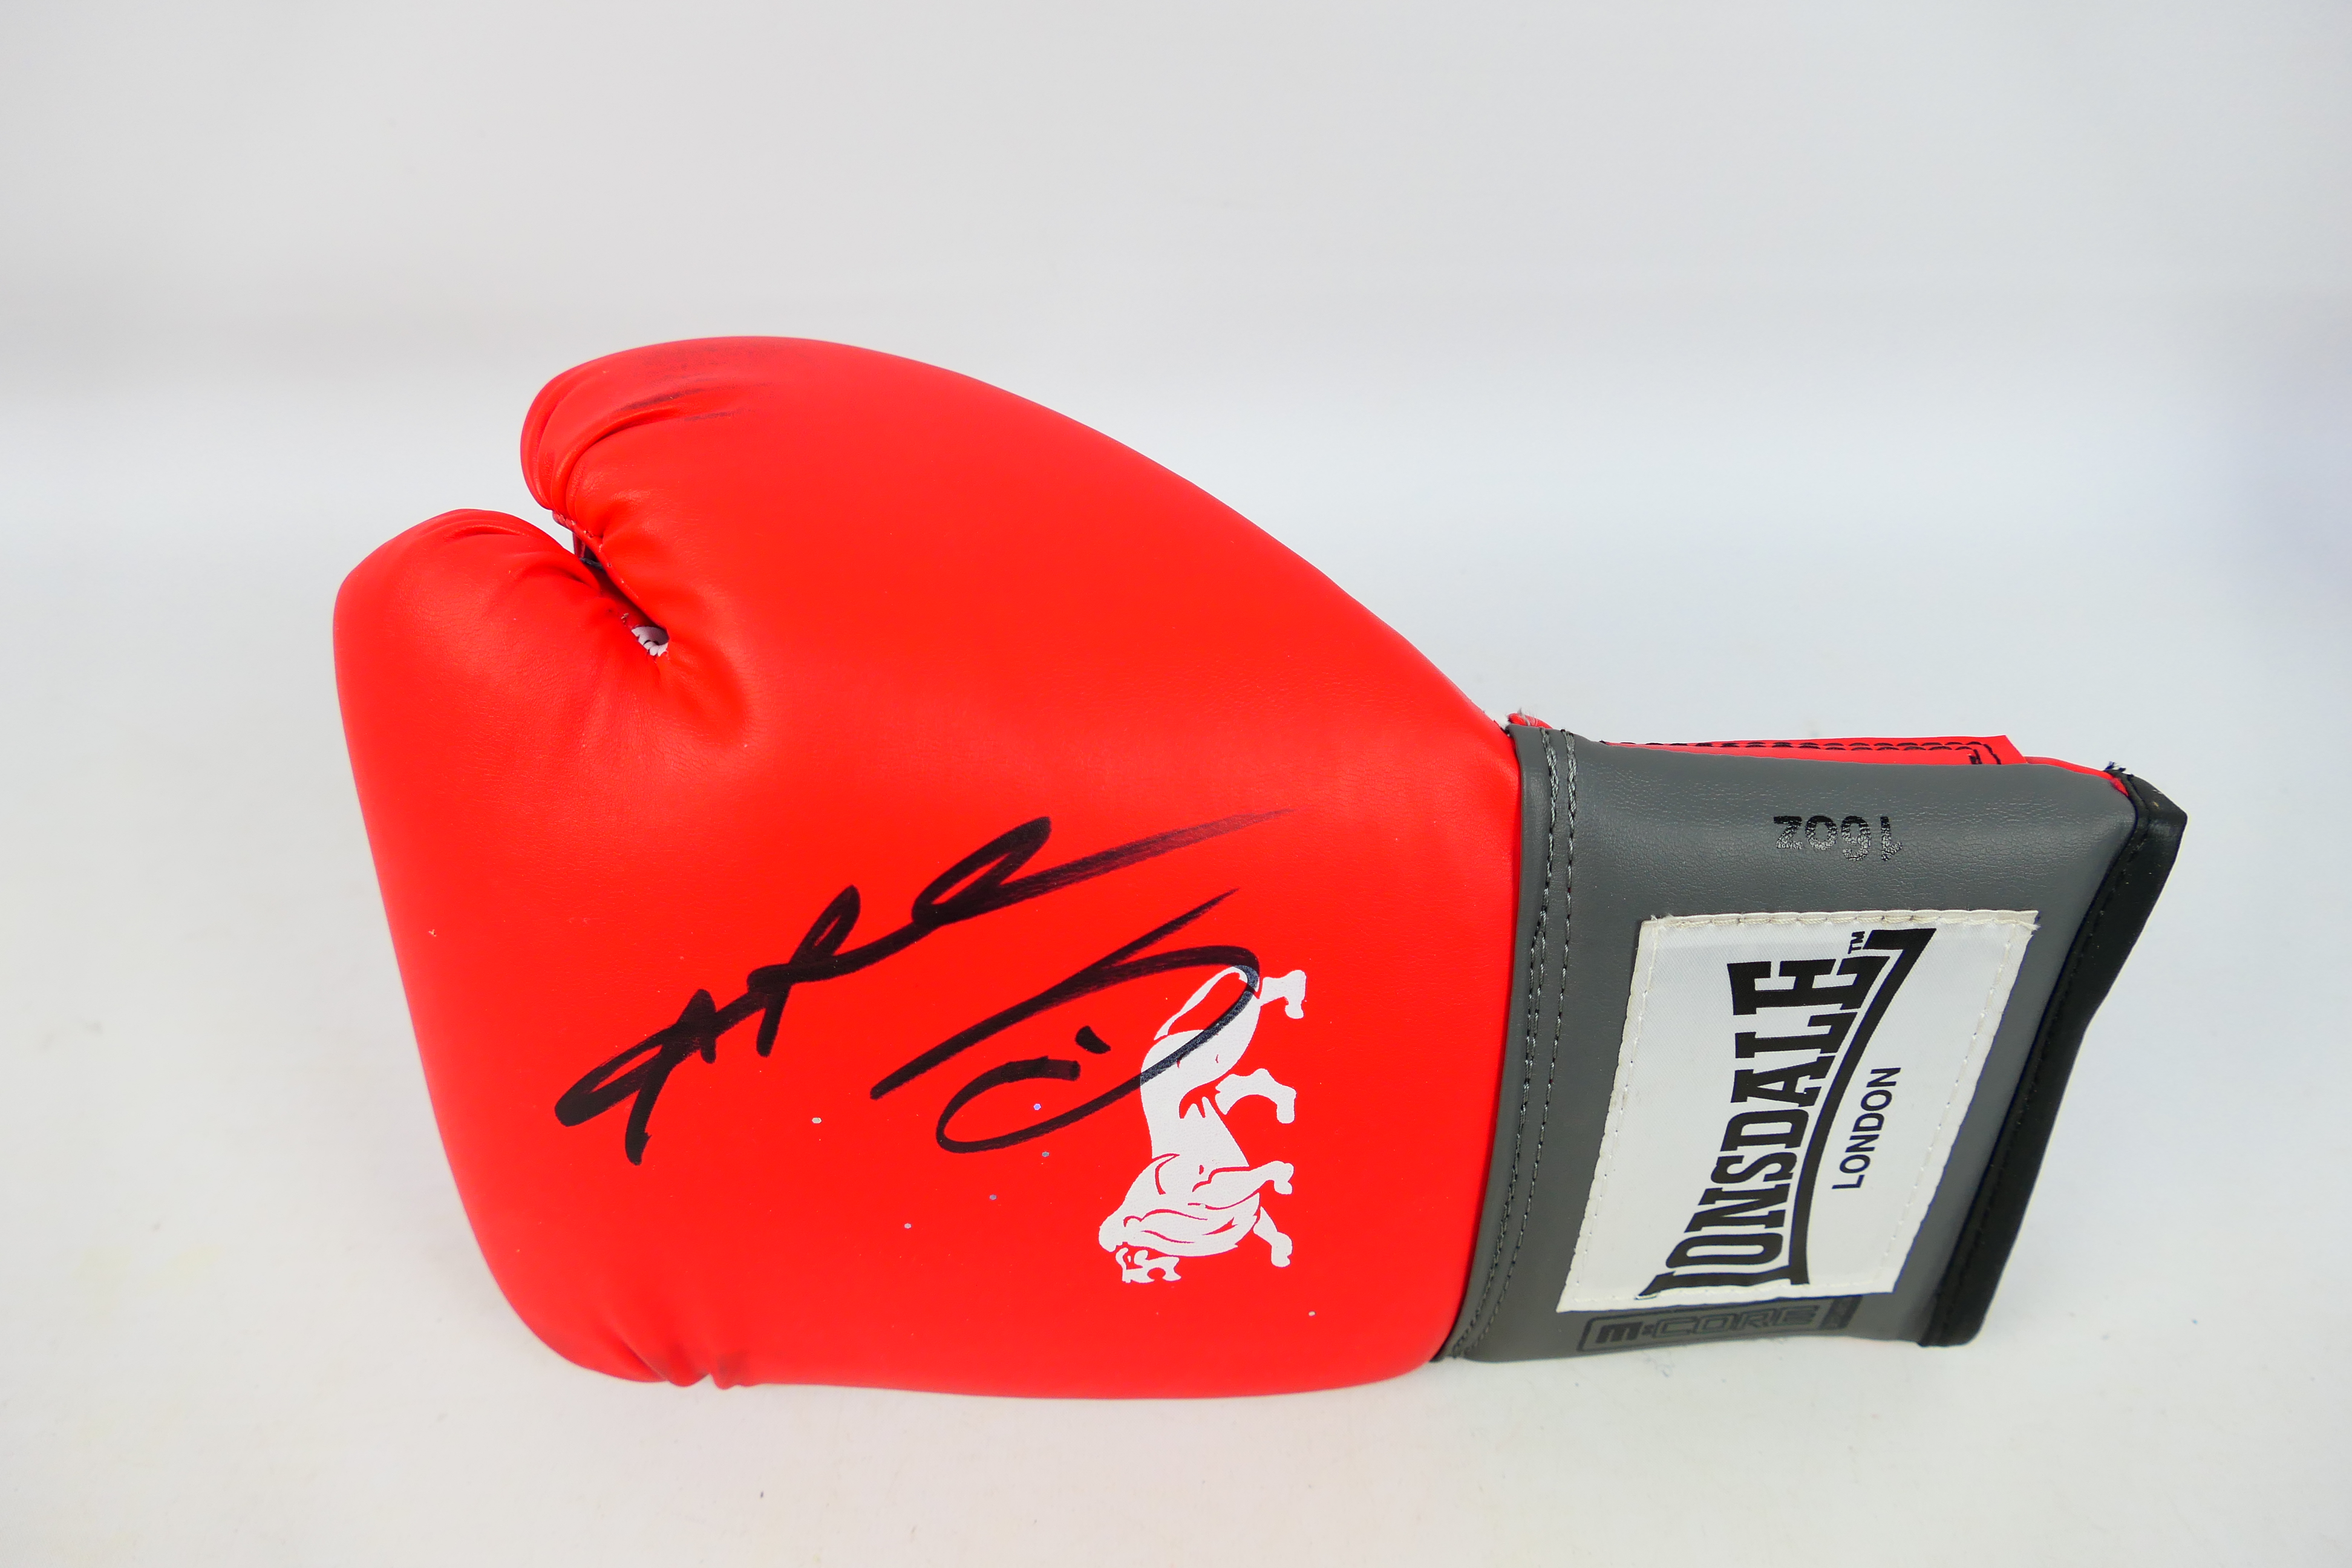 Boxing Interest - A red Lonsdale boxing glove signed by Sugar Ray Leonard (Ray Charles Leonard)